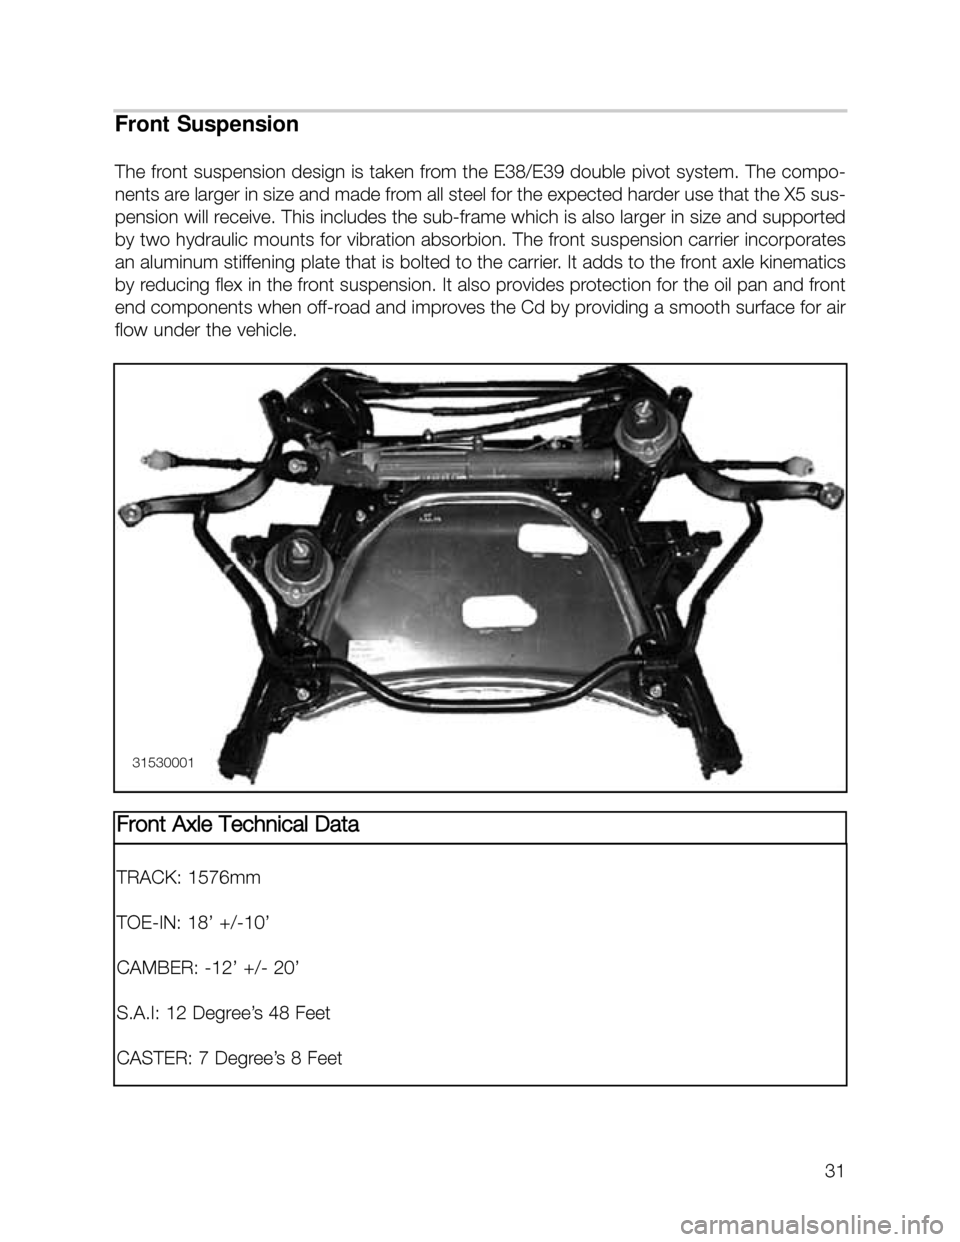 BMW X5 2004 E53 Owners Guide 31
Front Suspension
The front suspension design is taken from the E38/E39 double pivot system. The compo-
nents are larger in size and made from all steel for the expected harder use that the X5 sus-
